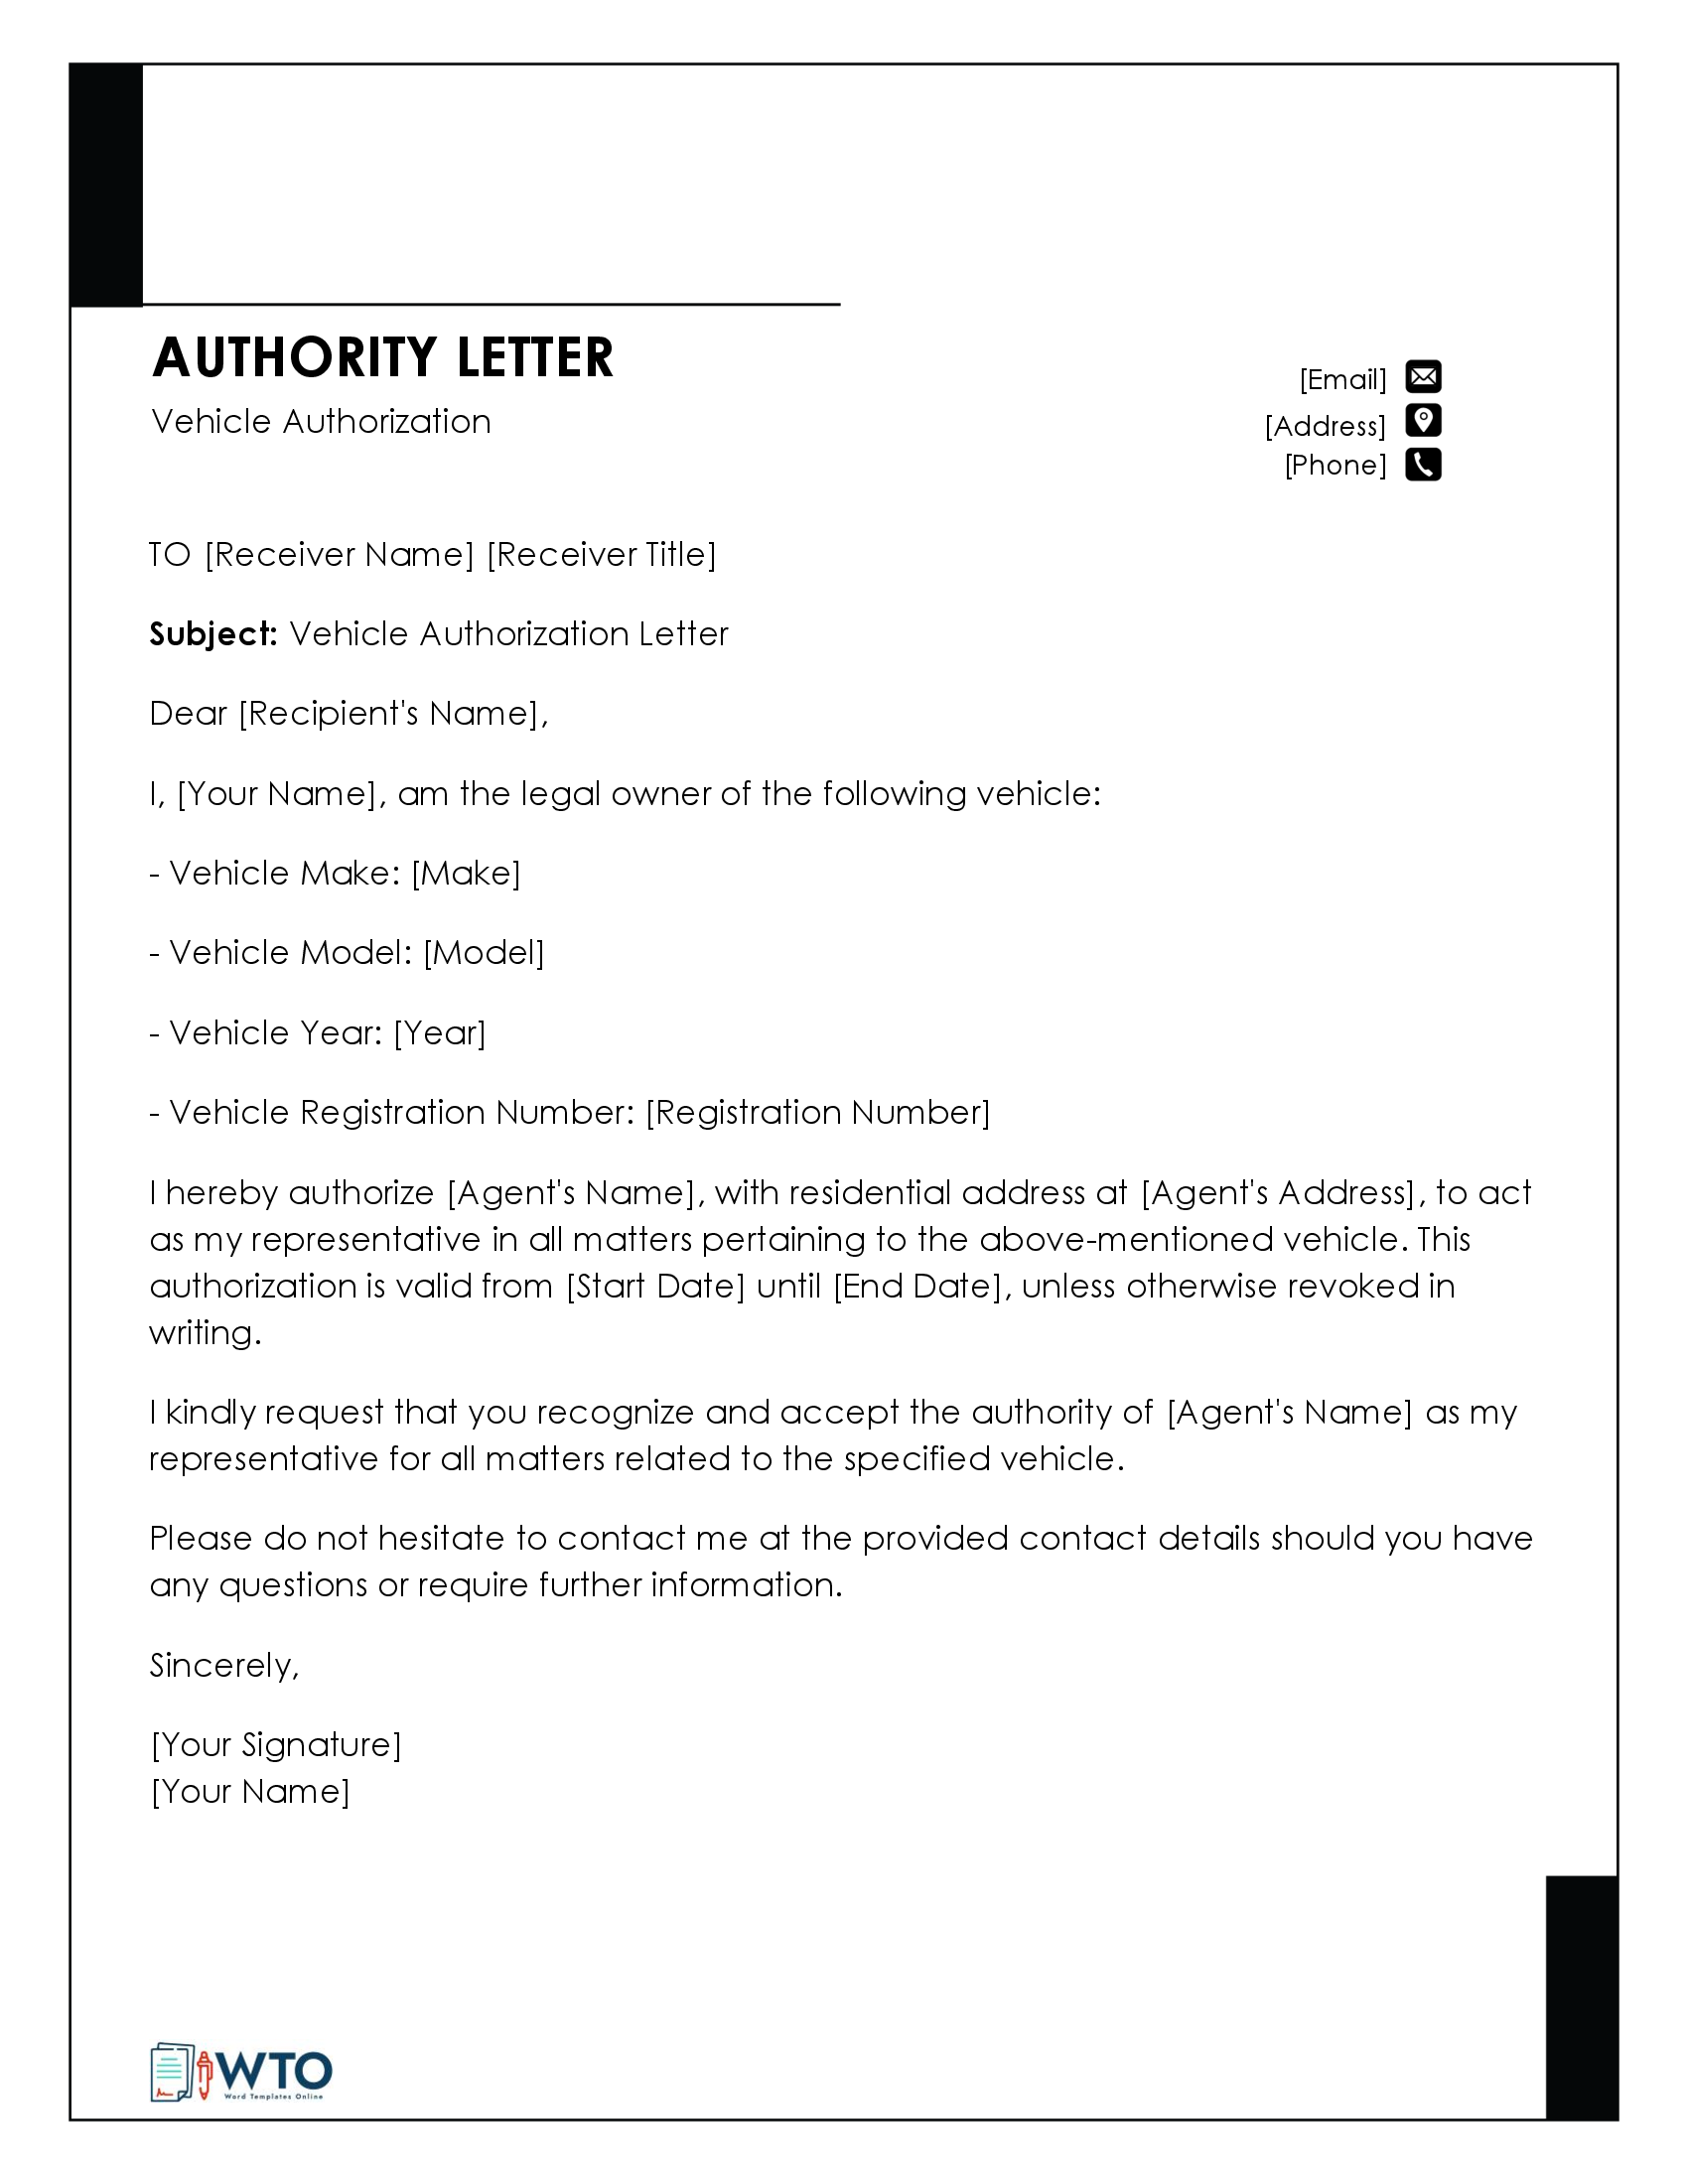 Vehicle Authorization Letter Template in ms word